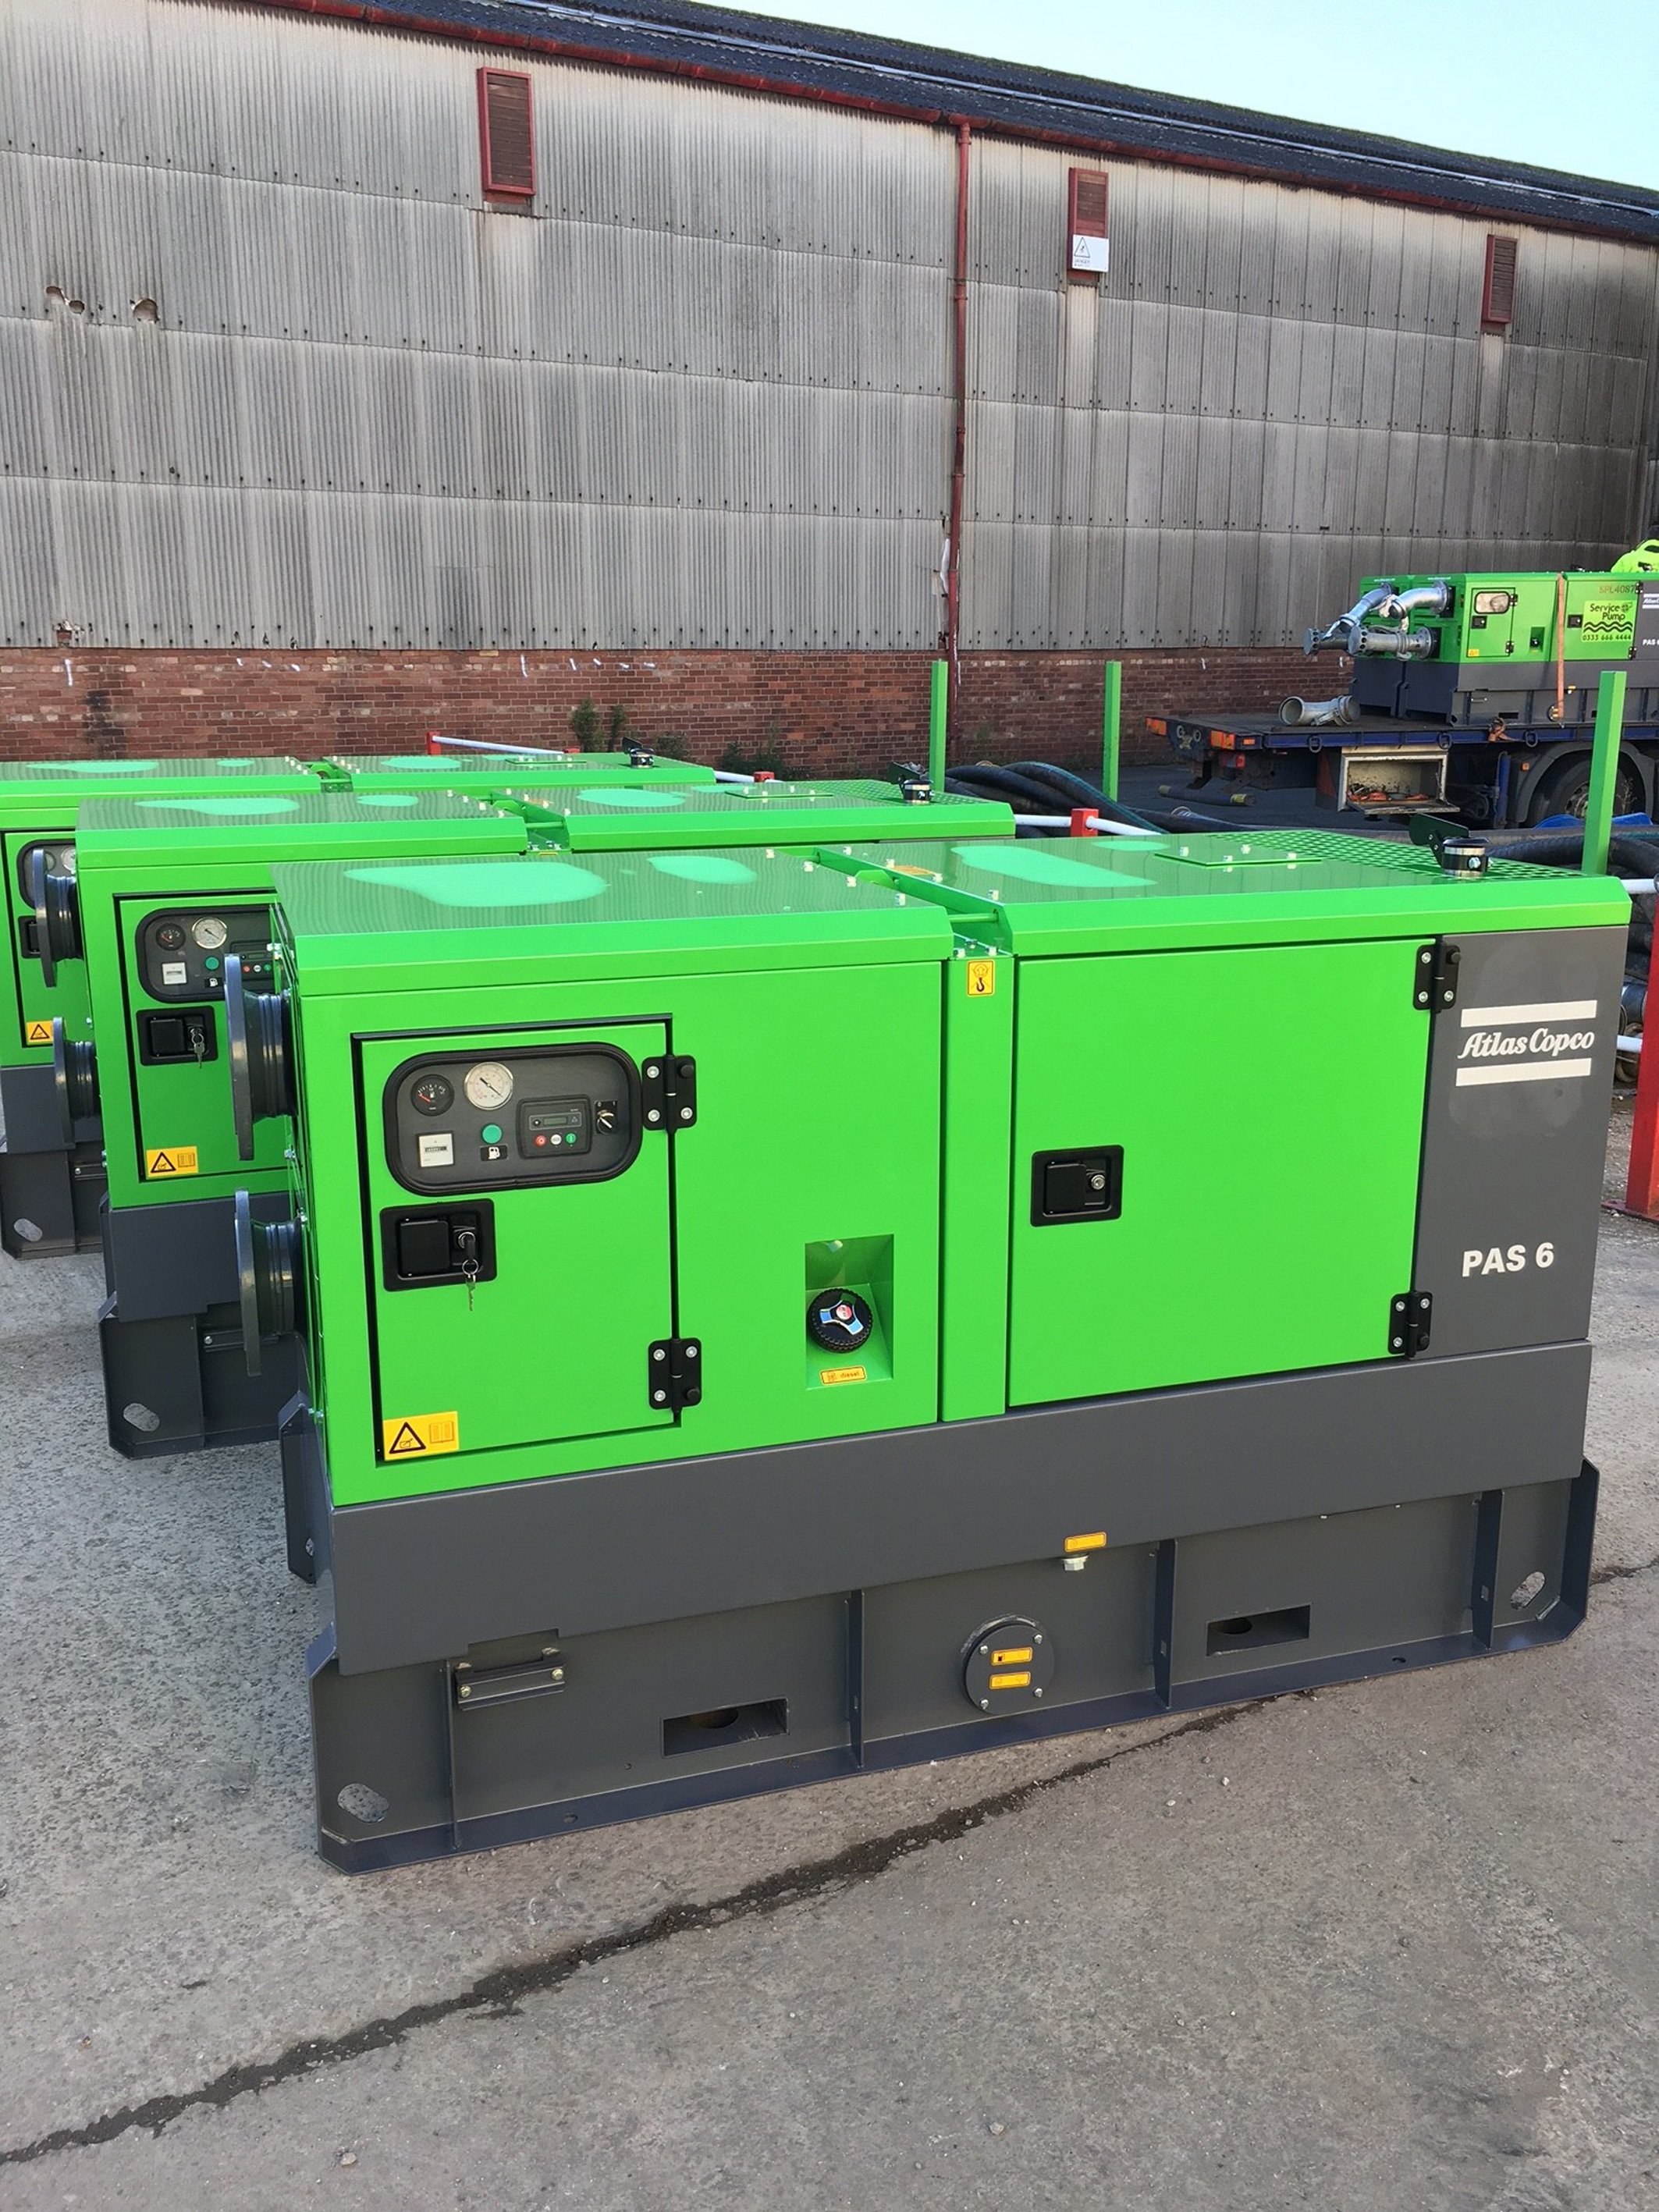 Service Pump Ltd chose Atlas Copco for their major hire fleet investment due to the quality of the PAS Range of diesel driven automatic dry prime pumps.